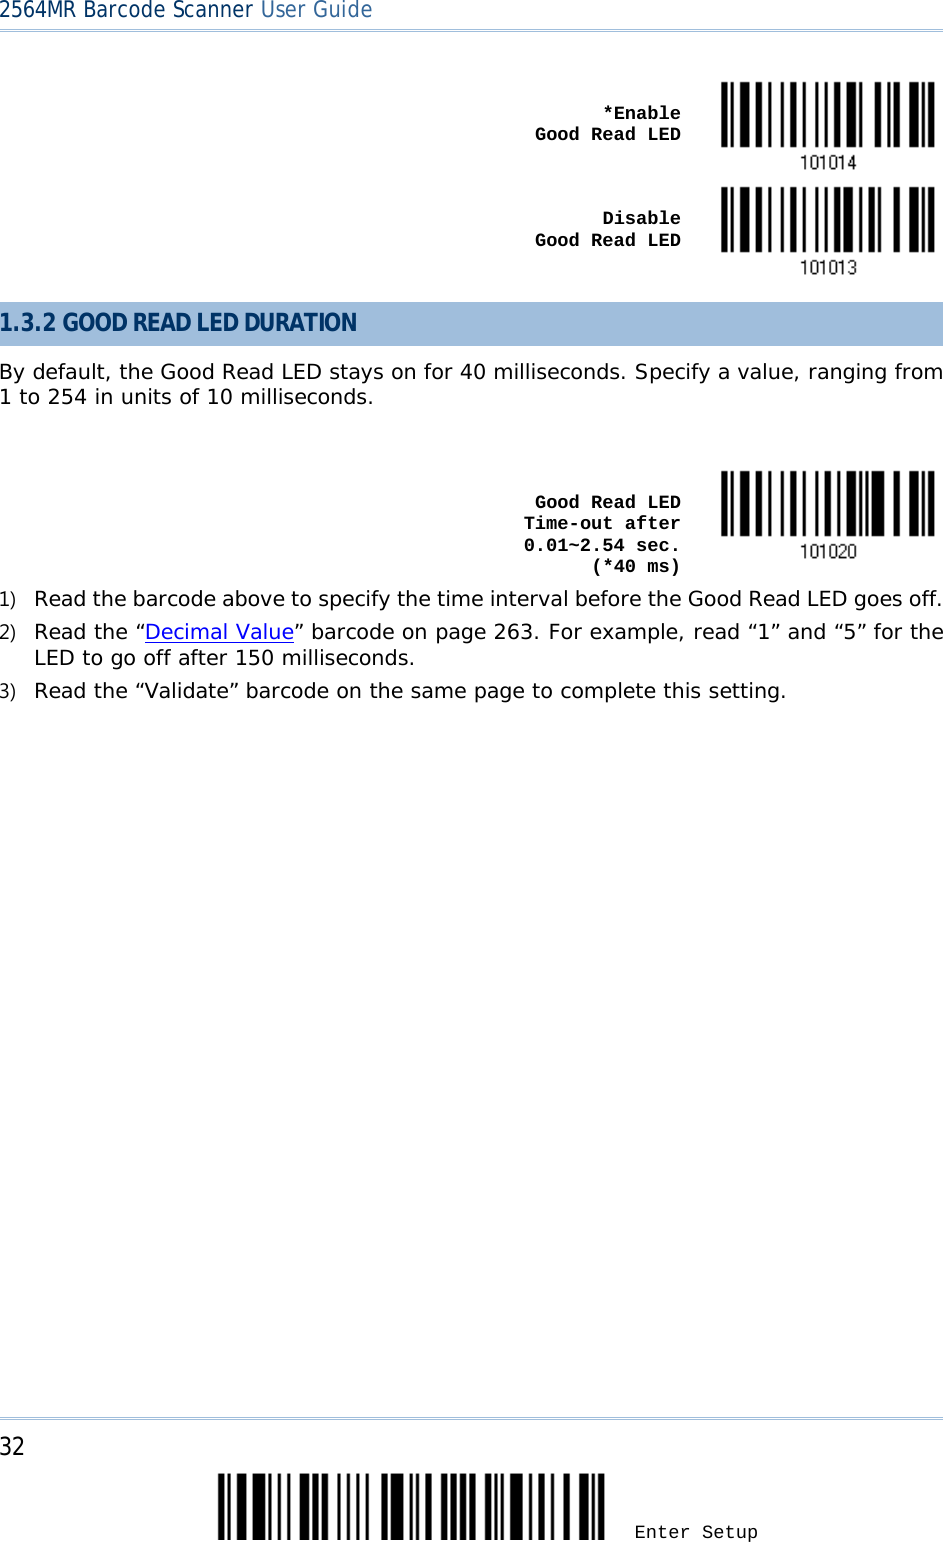 2564MR Barcode Scanner User Guide     *Enable          Good Read LED     Disable          Good Read LED   1.3.2 GOOD READ LED DURATION By default, the Good Read LED stays on for 40 milliseconds. Specify a value, ranging from 1 to 254 in units of 10 milliseconds.     Good Read LED Time-out after 0.01~2.54 sec.    (*40 ms)  1) Read the barcode above to specify the time interval before the Good Read LED goes off. 2) Read the “Decimal Value” barcode on page 263. For example, read “1” and “5” for the LED to go off after 150 milliseconds.  3) Read the “Validate” barcode on the same page to complete this setting.  32 Enter Setup 